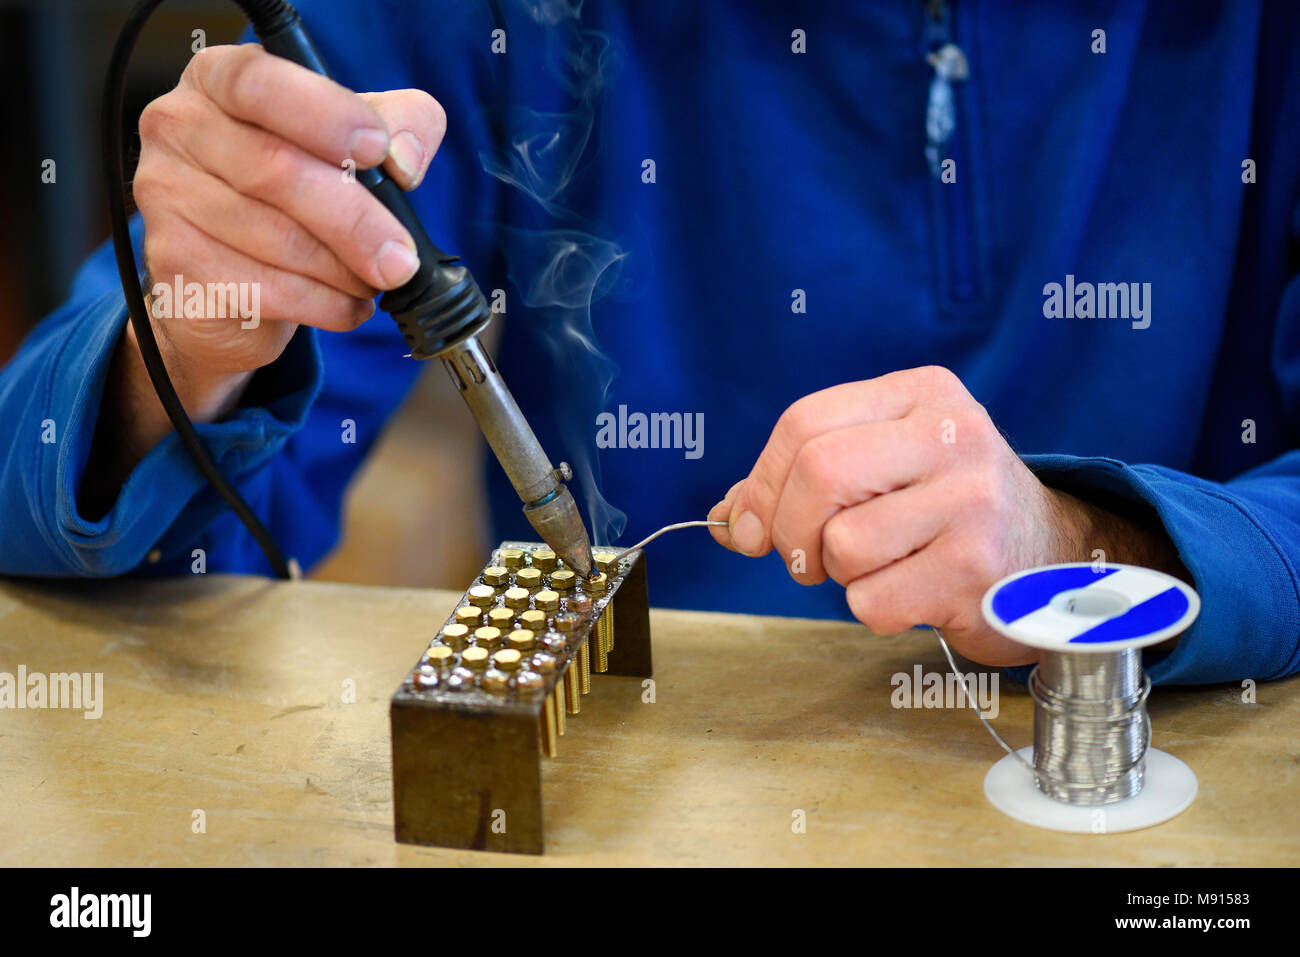 Close up view of worker soldering metal elements in close up Stock Photo